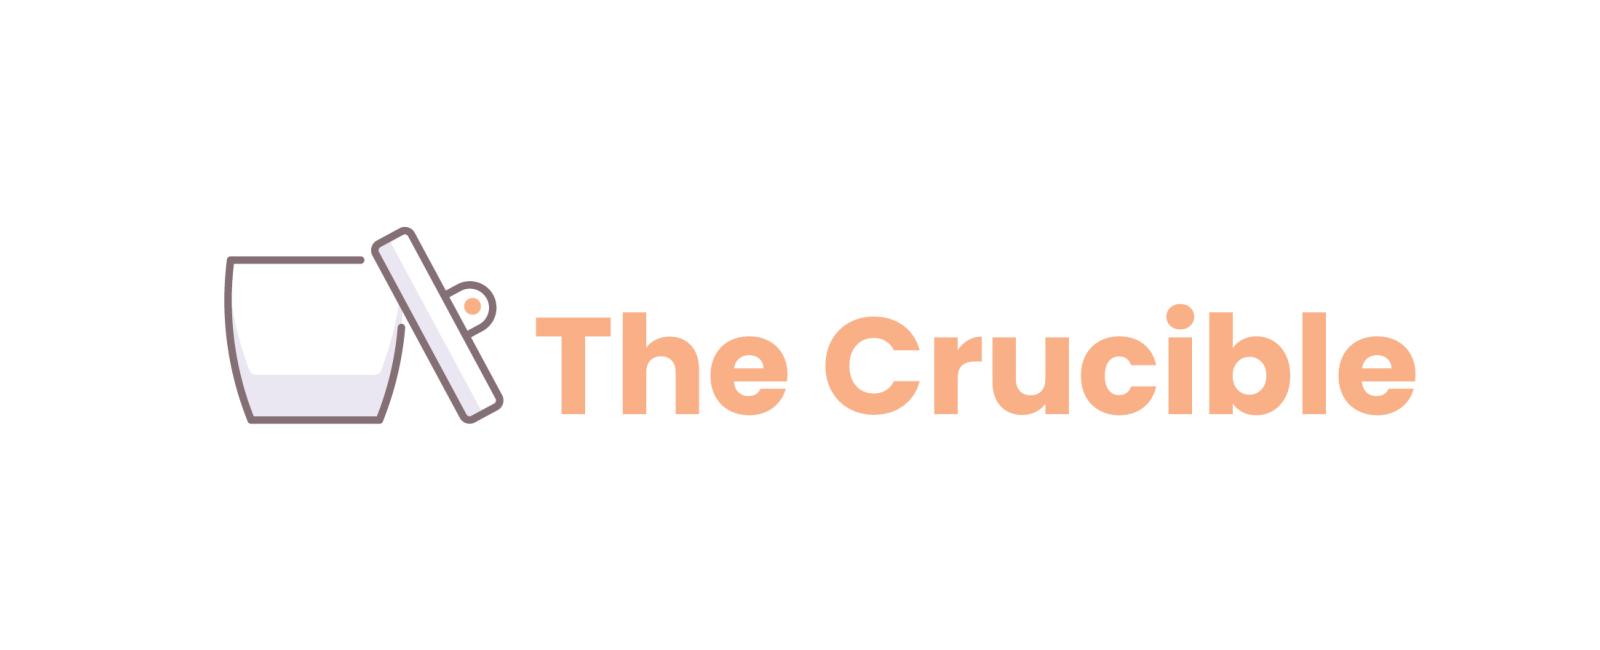 The Crucible is a newly released Company Forum for Shareholders and Investors